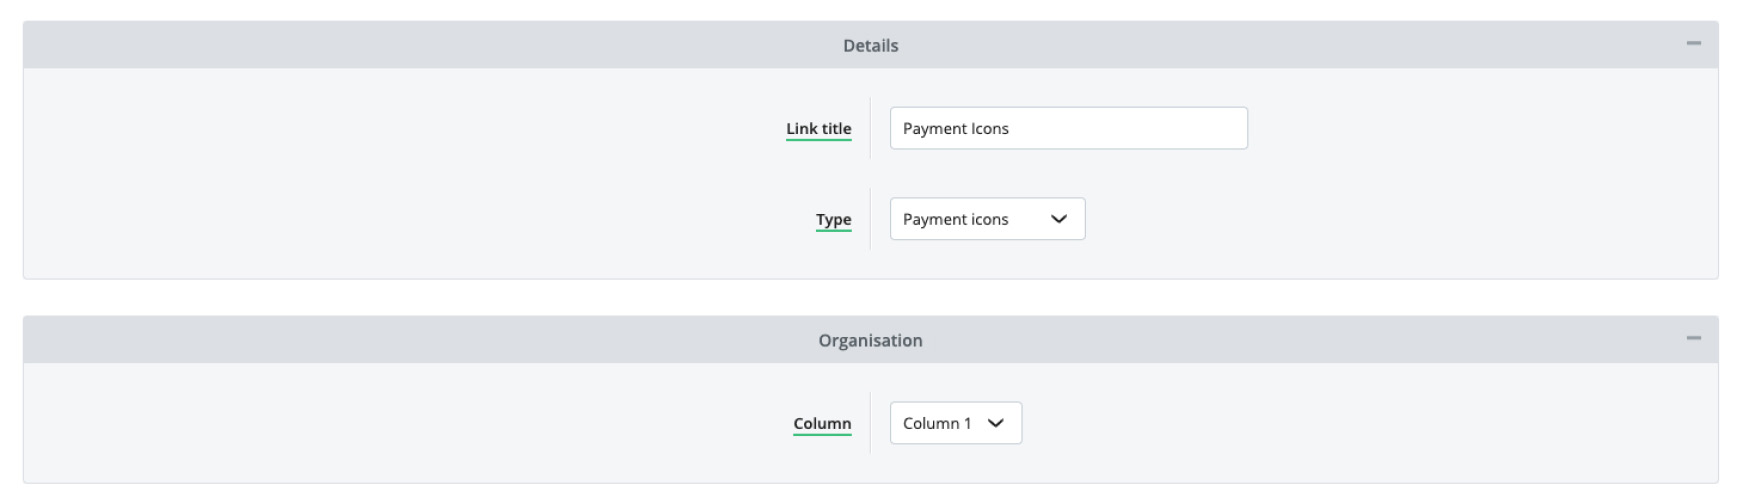 Payment icons footer element set up